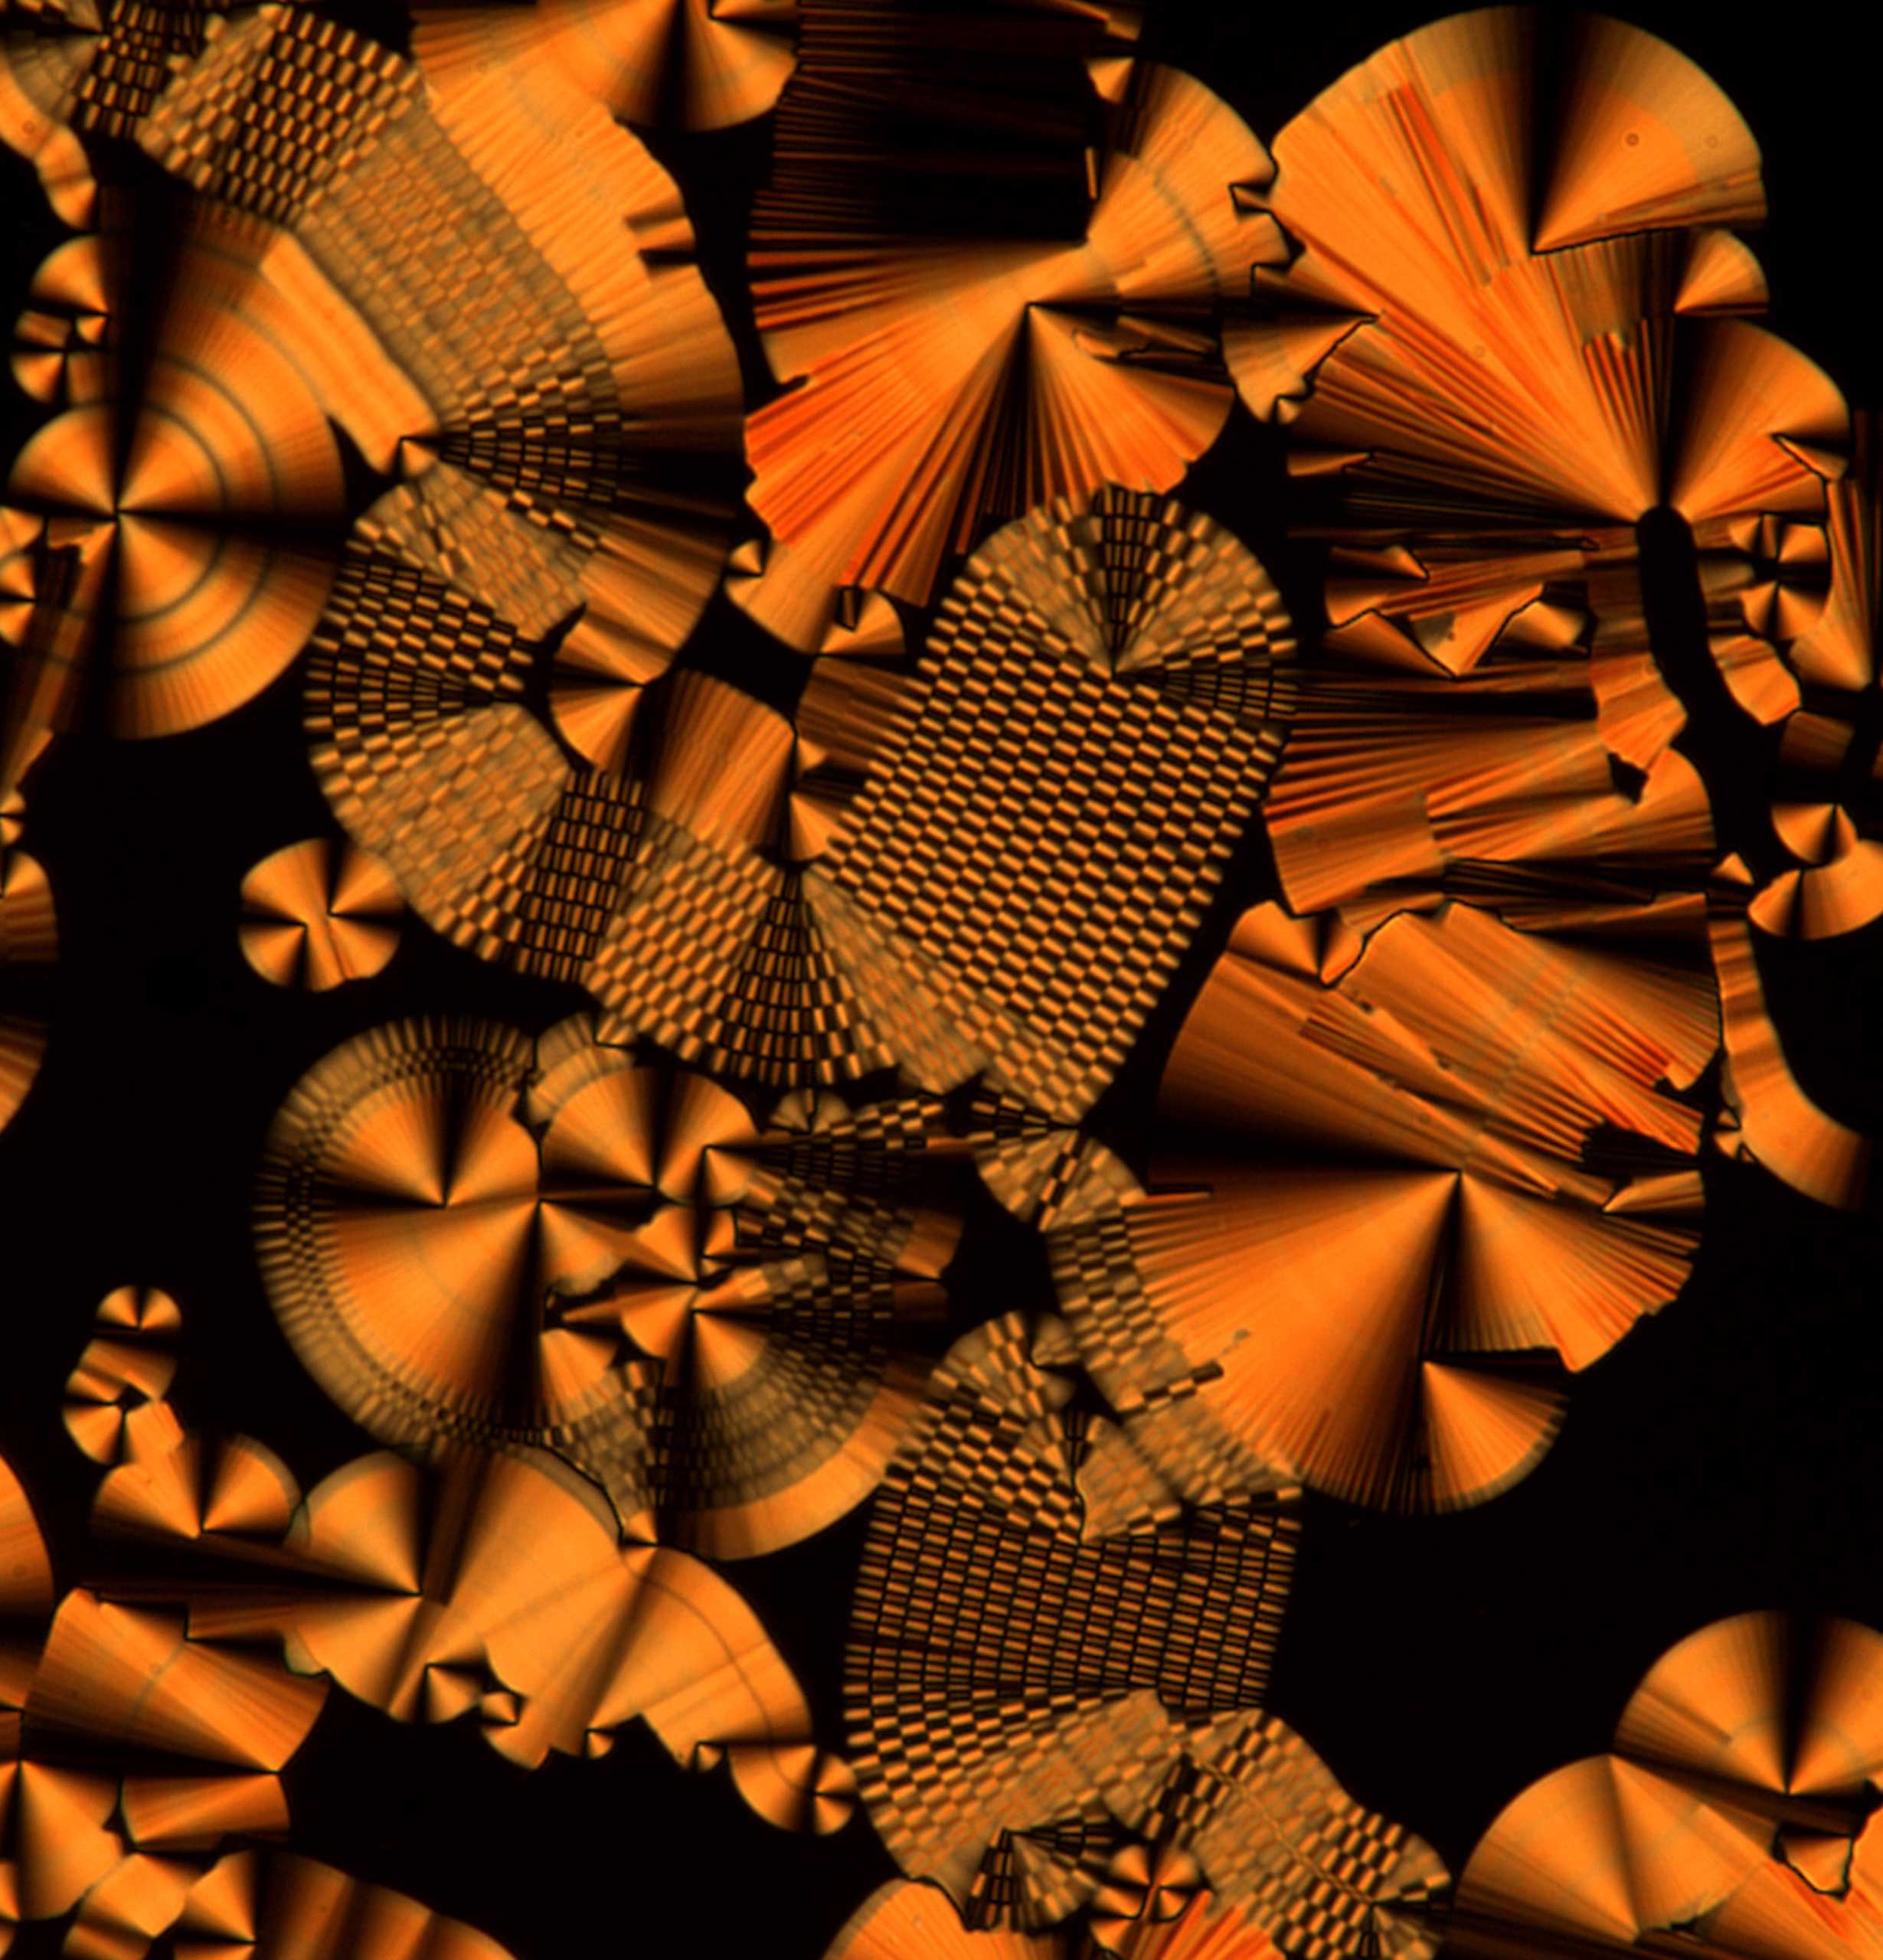 Focal conic-like domain with varying degrees of modulation and checkerboard patterns at 40x magnification.